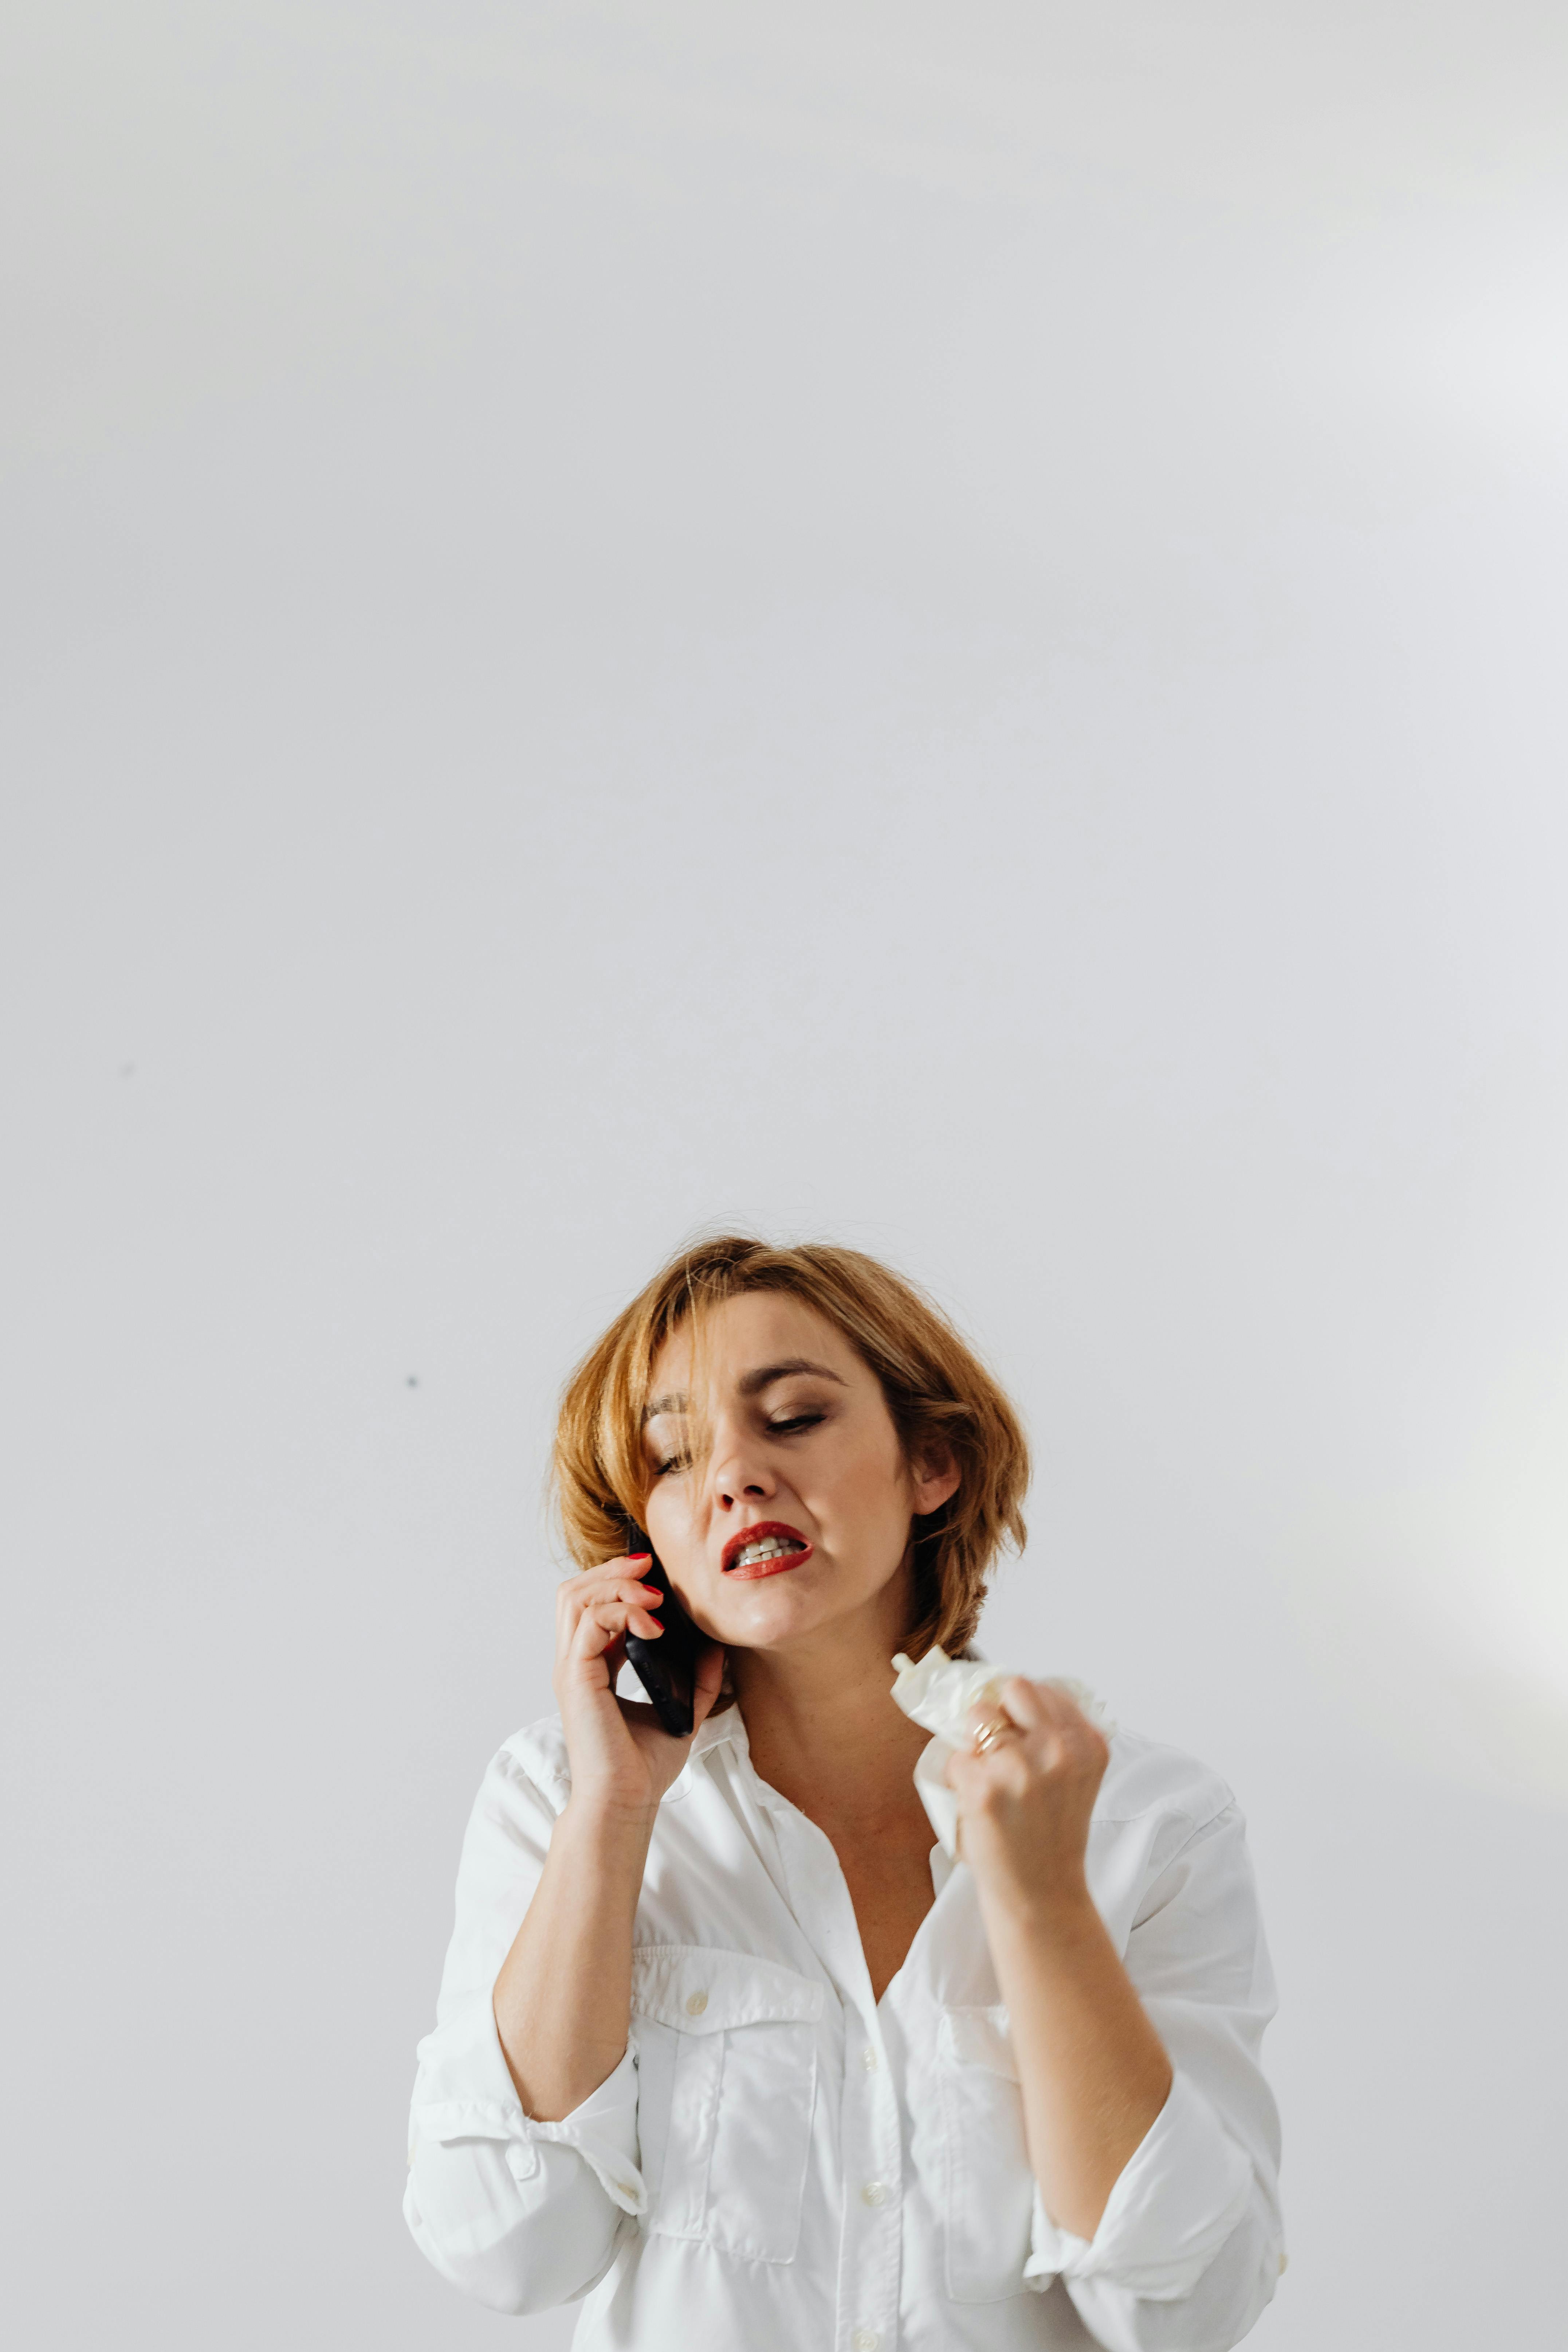 Angry crying woman talks on the phone | Source: Pexels